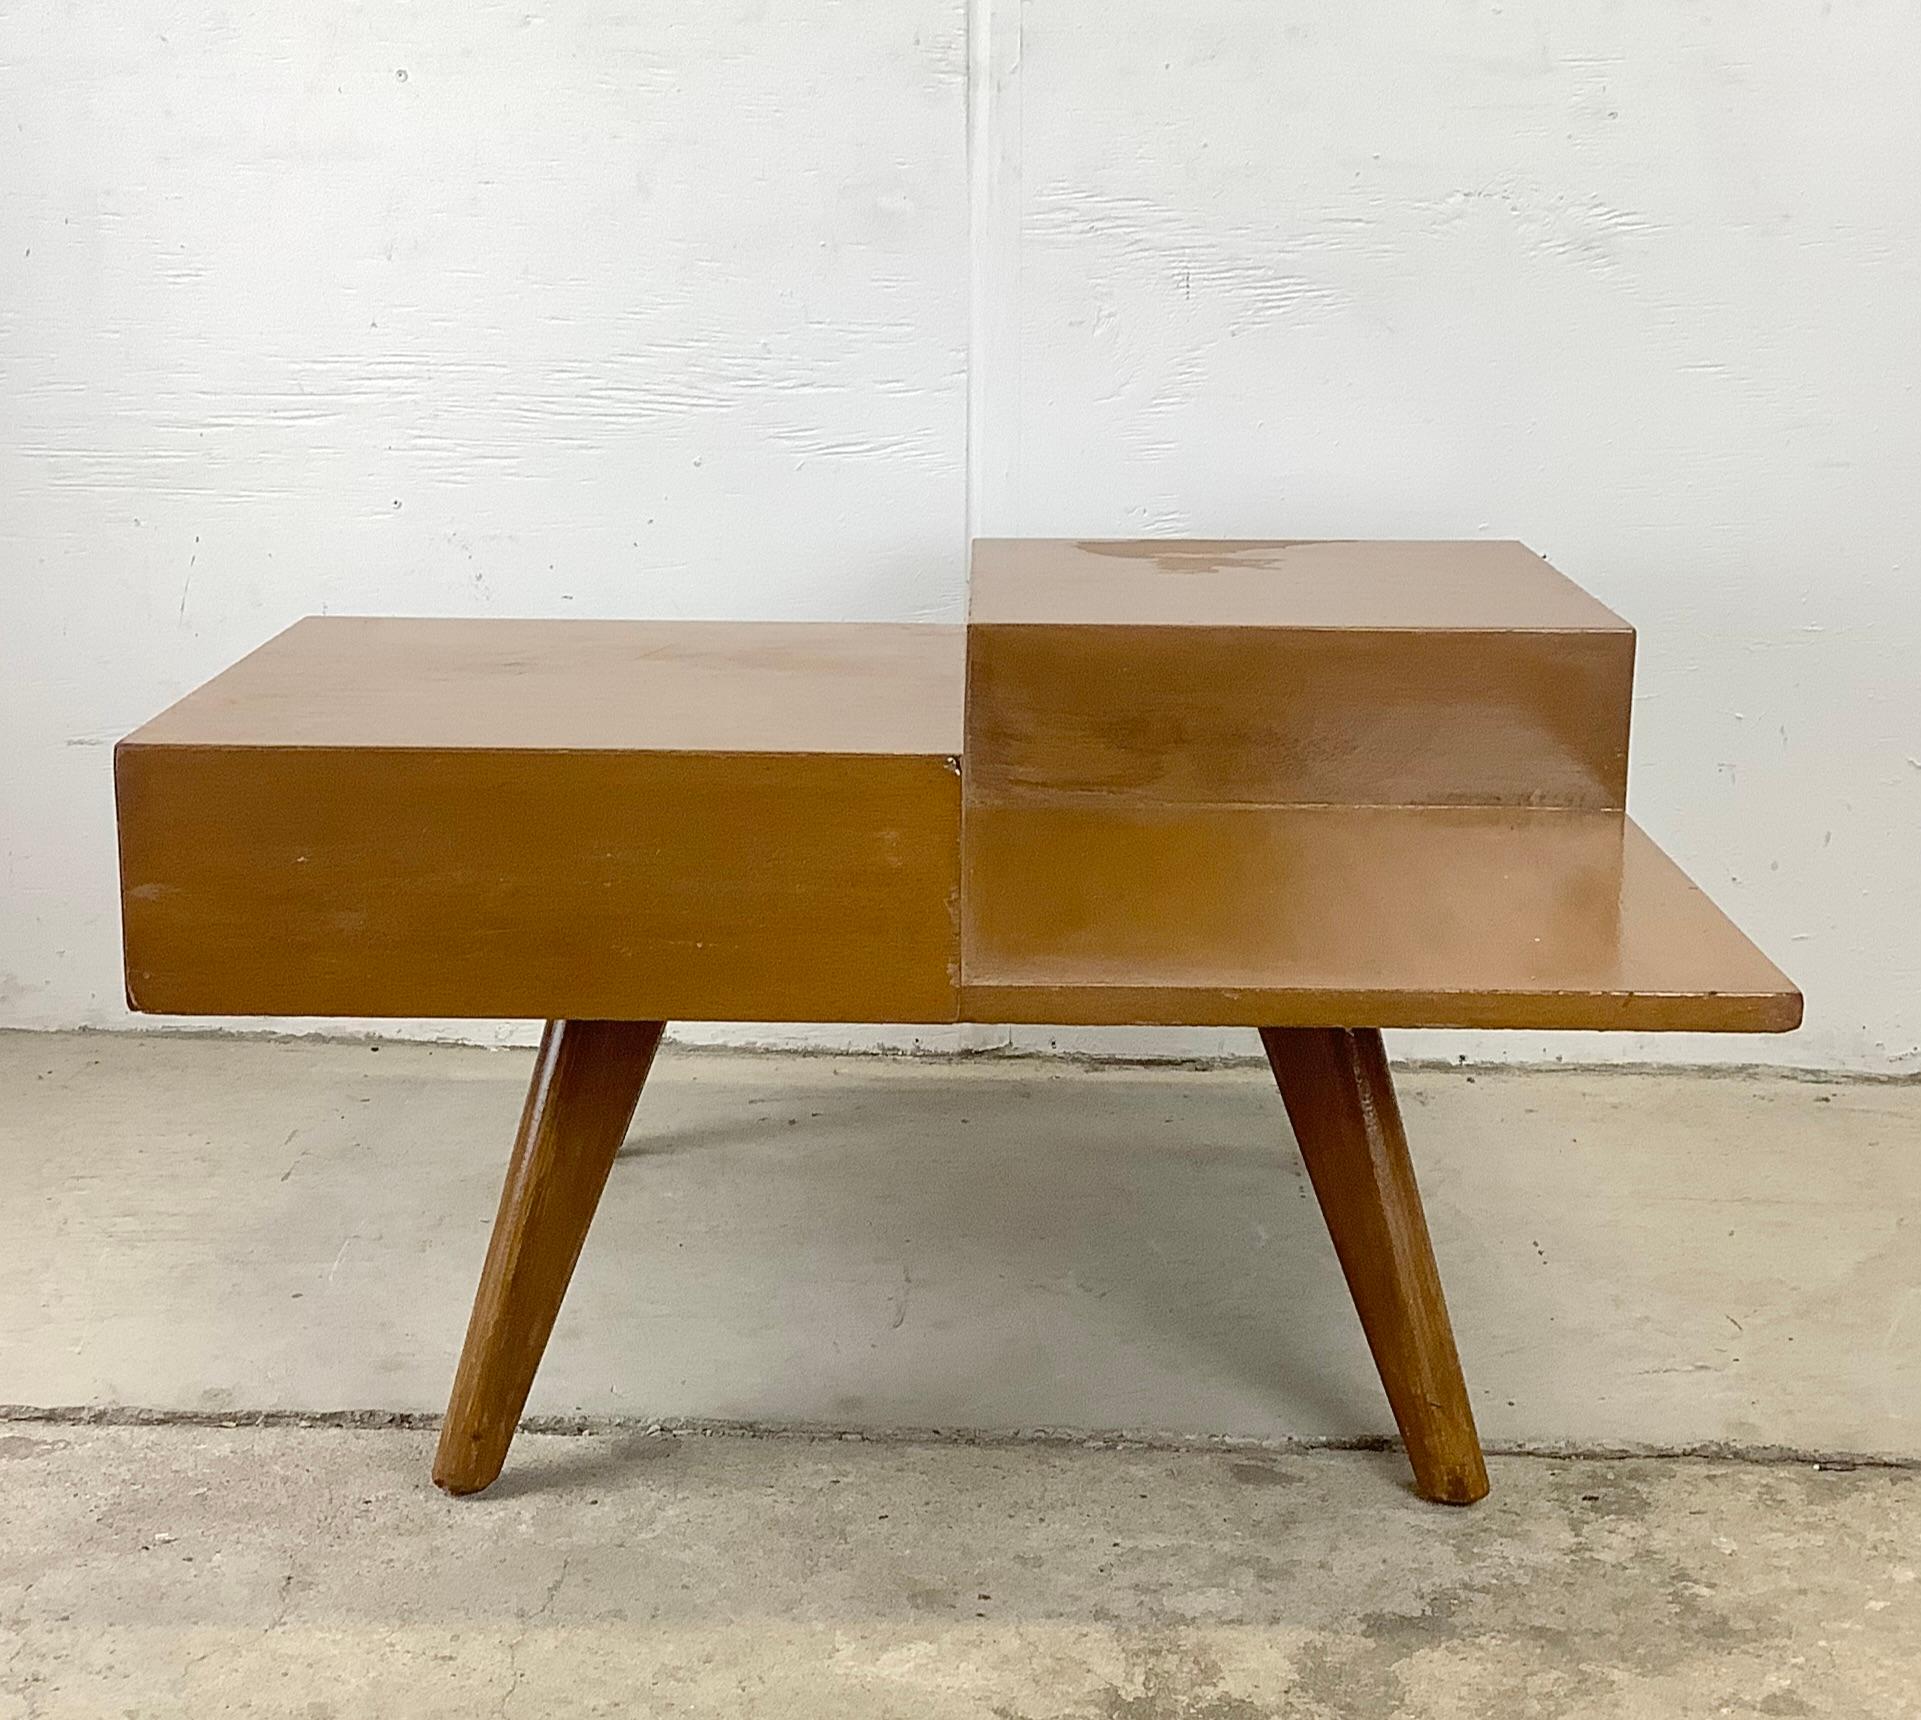 This unique mid-century cocktail table features a striking two tier design with dual pull out drawers for extra storage hidden right in your seating area. Vintage wood finish and sculptural tapered legs add a distinctive mid-century modern style to